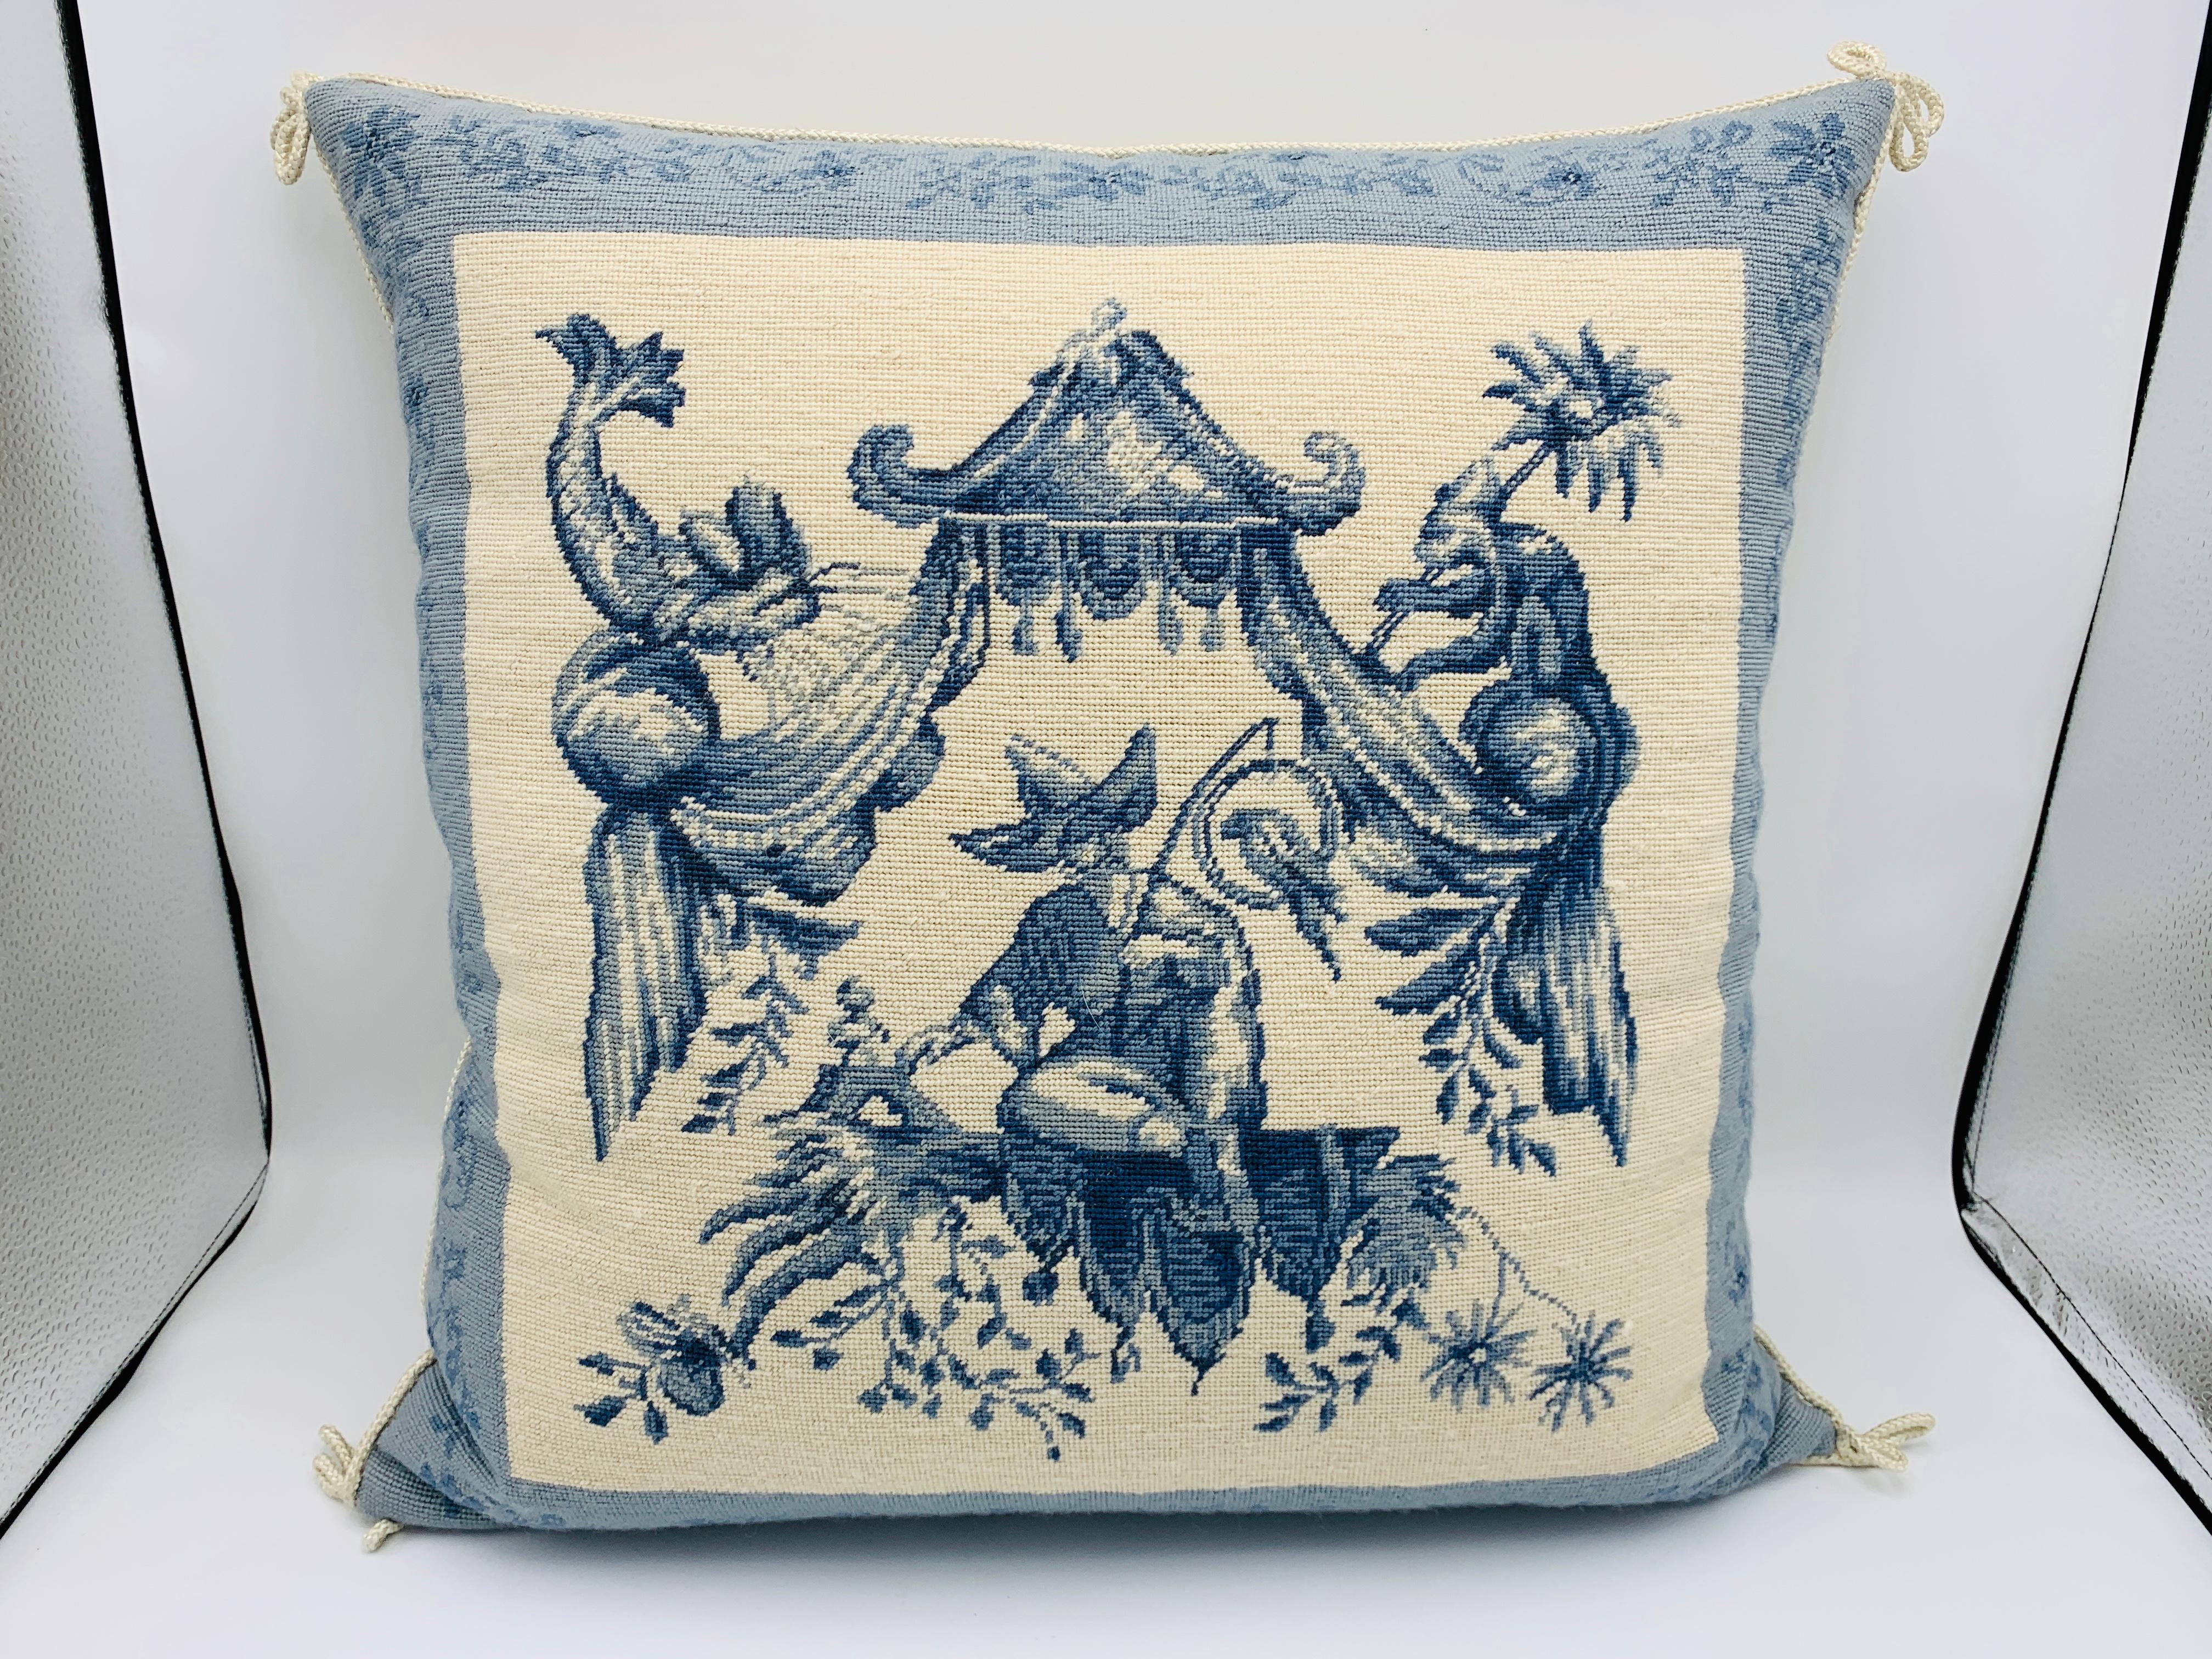 Listed is a stunning, 1970s blue and white chinoiserie needlepoint pillow. Tight-knit needlepoint weave along the front side, with a beige cotton-velvet backing, complimented by an ivory colored rope-ribbon welt. Zipper closure. Includes down insert.